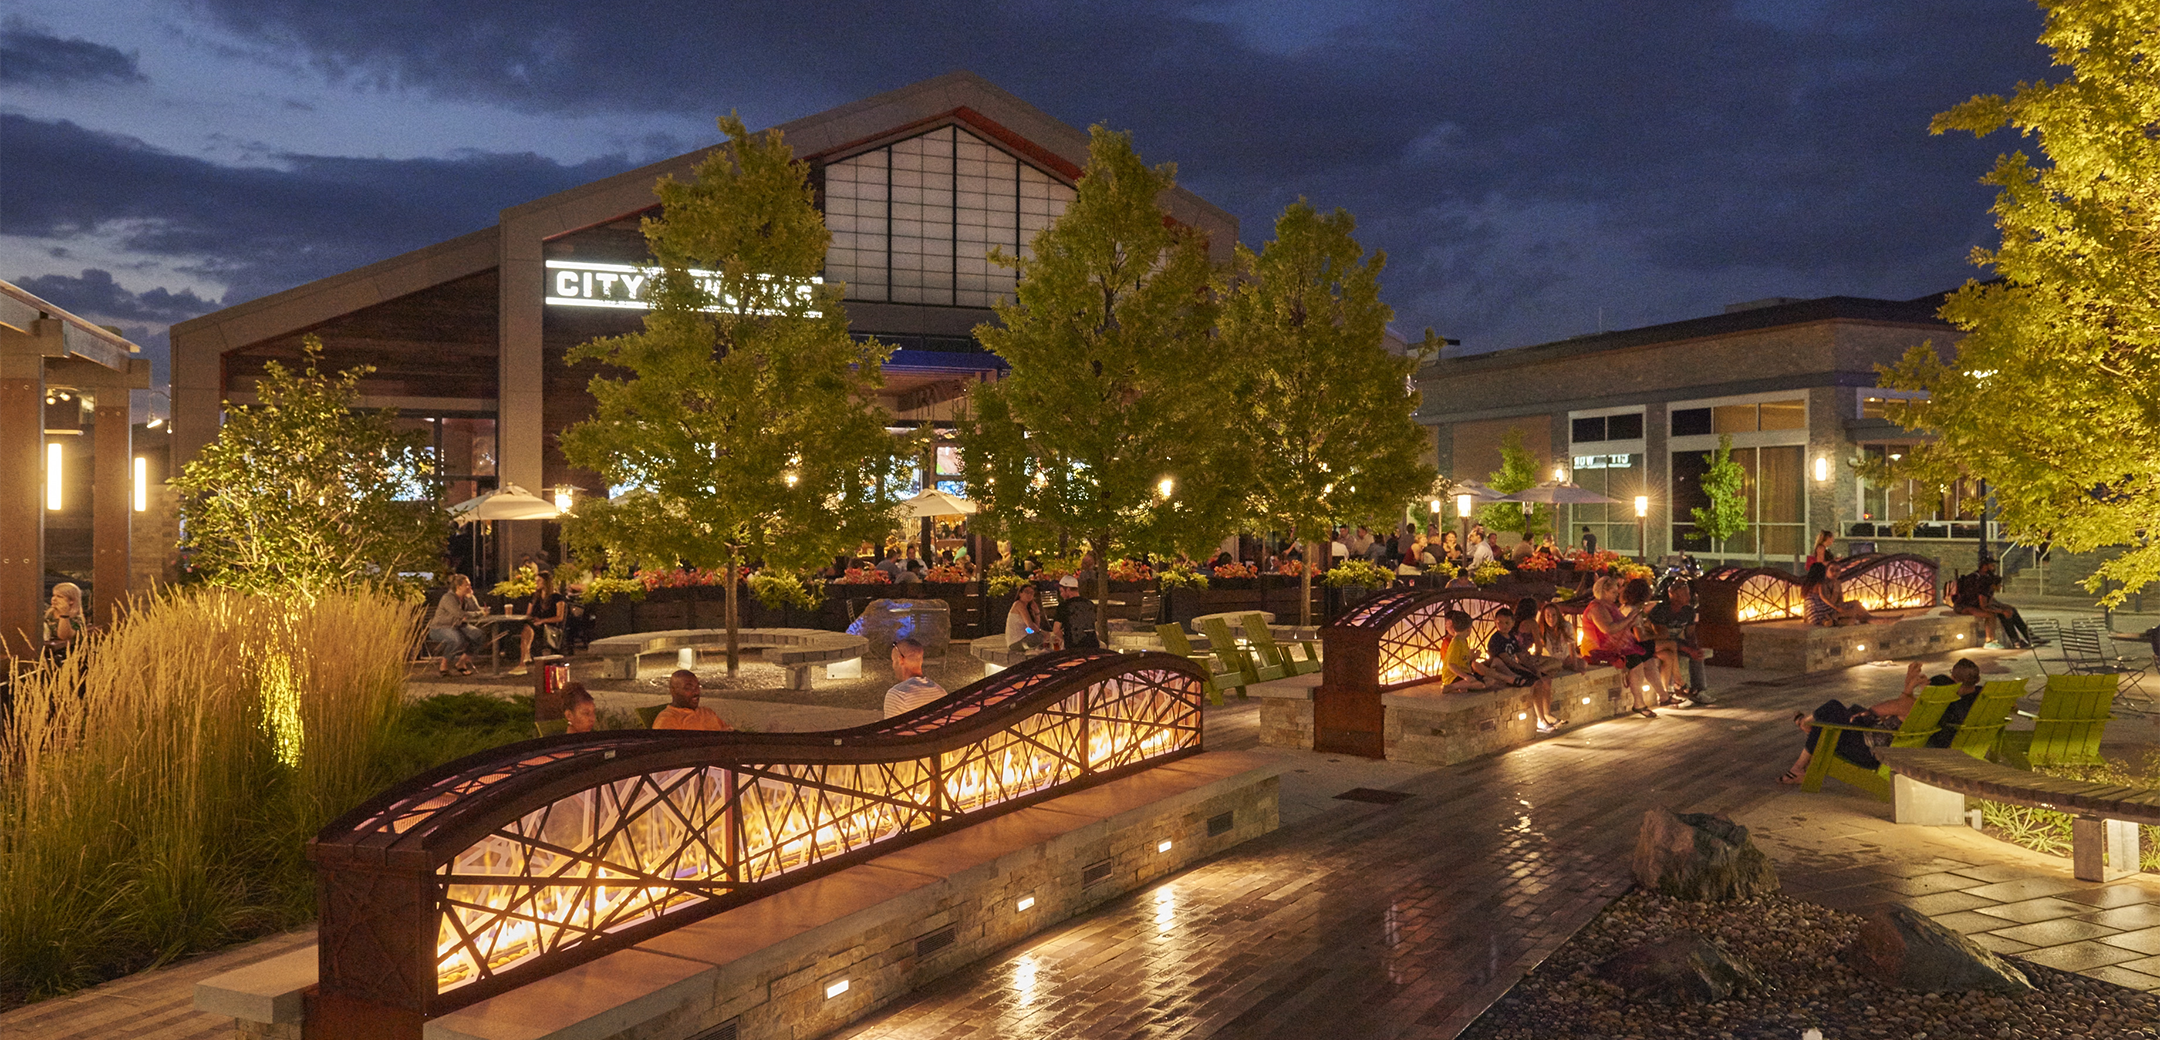 An exterior nighttime view of the KOP Center showcasing the brick seating with lit backrests in the middle of the walkway of the square.